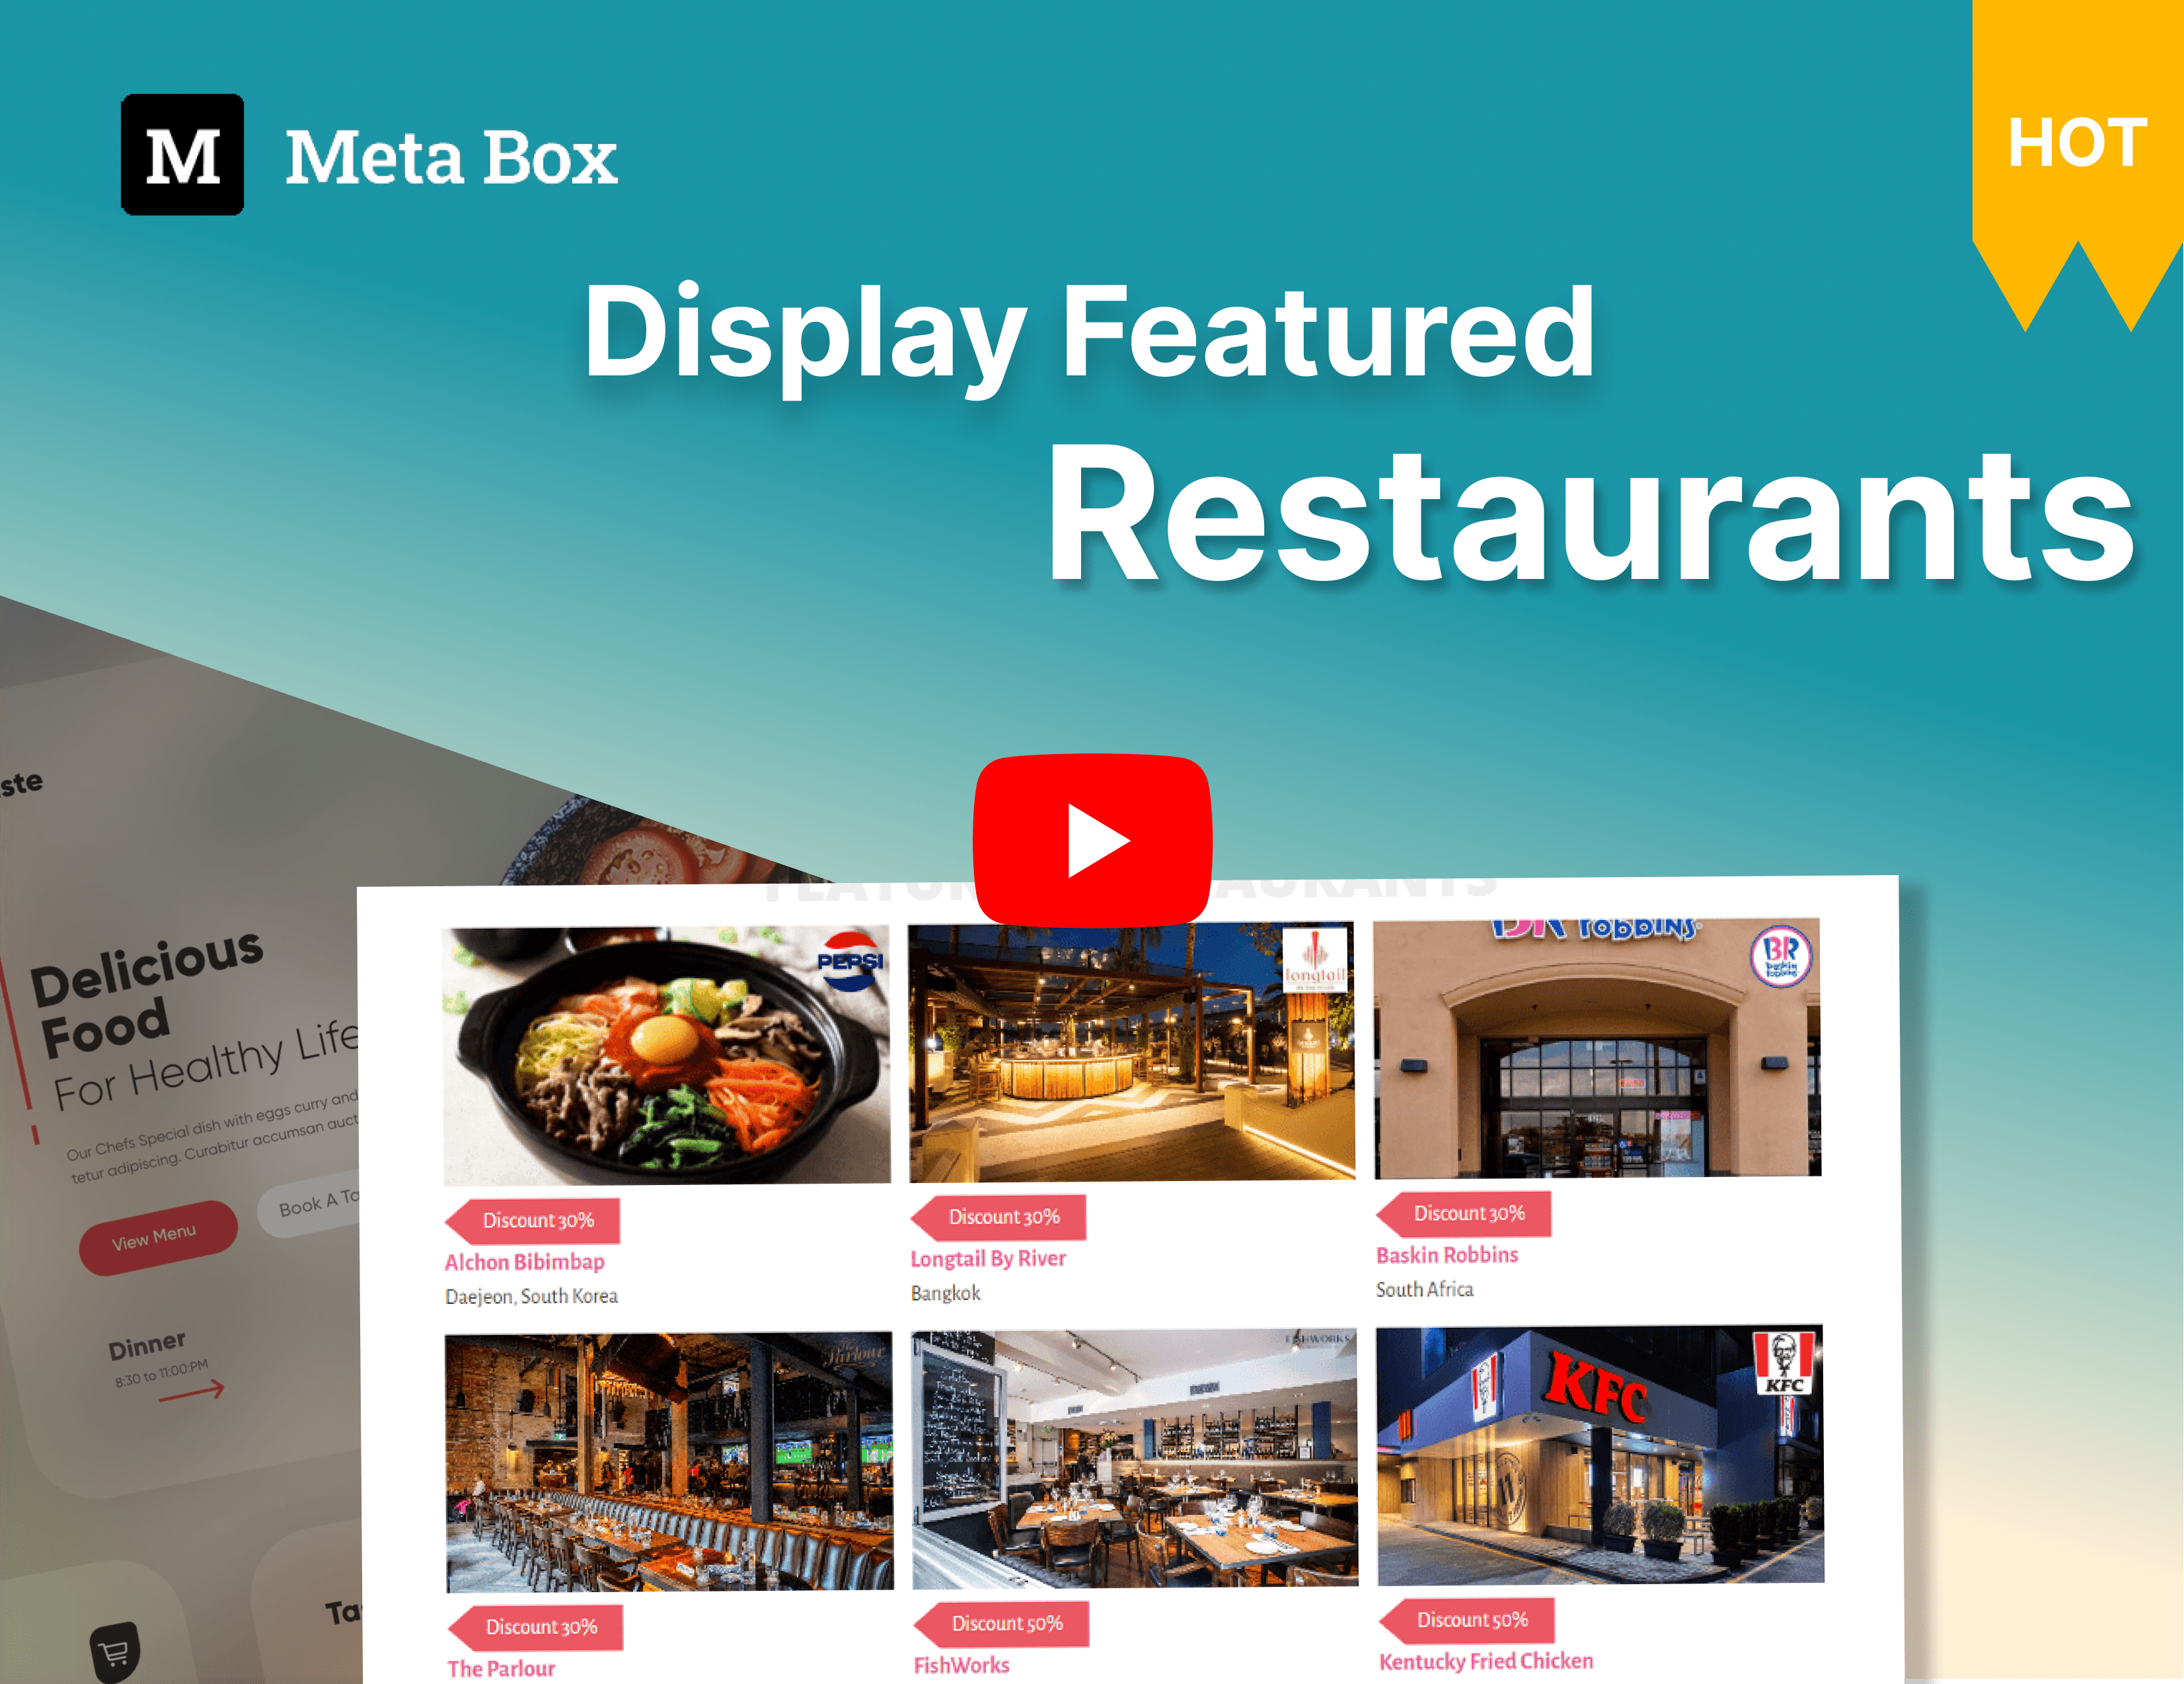 showing the featured restaurants